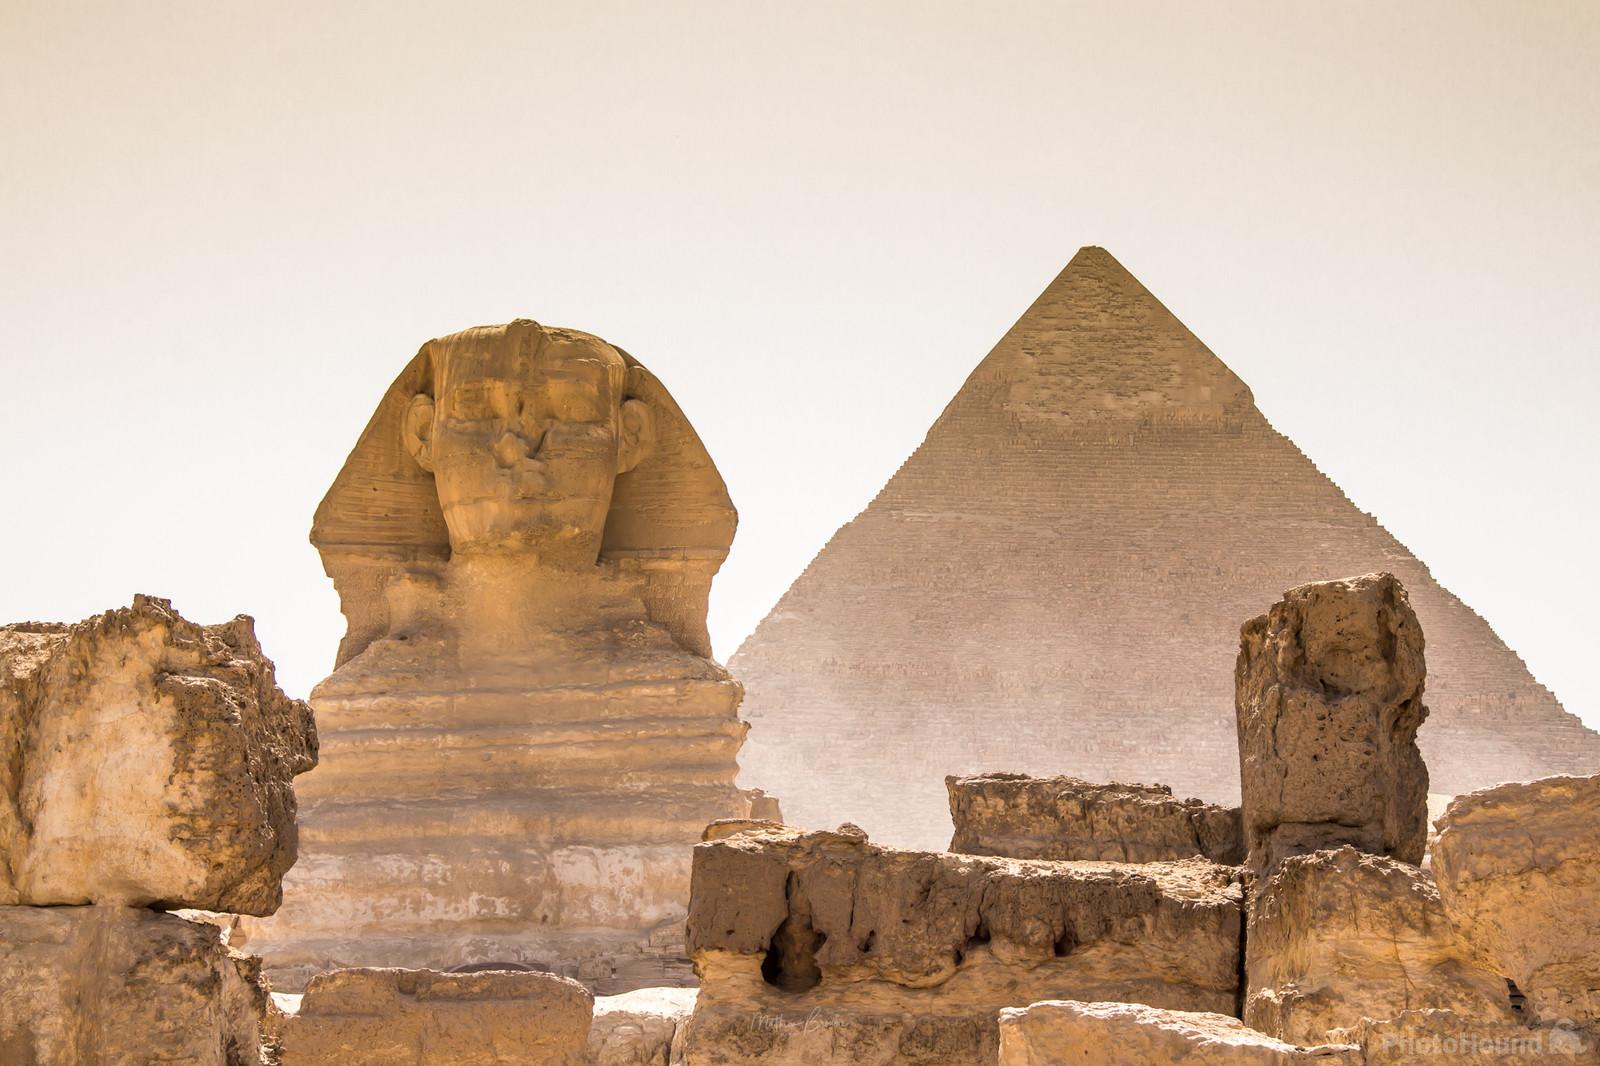 Image of Great Sphinx of Giza by Mathew Browne